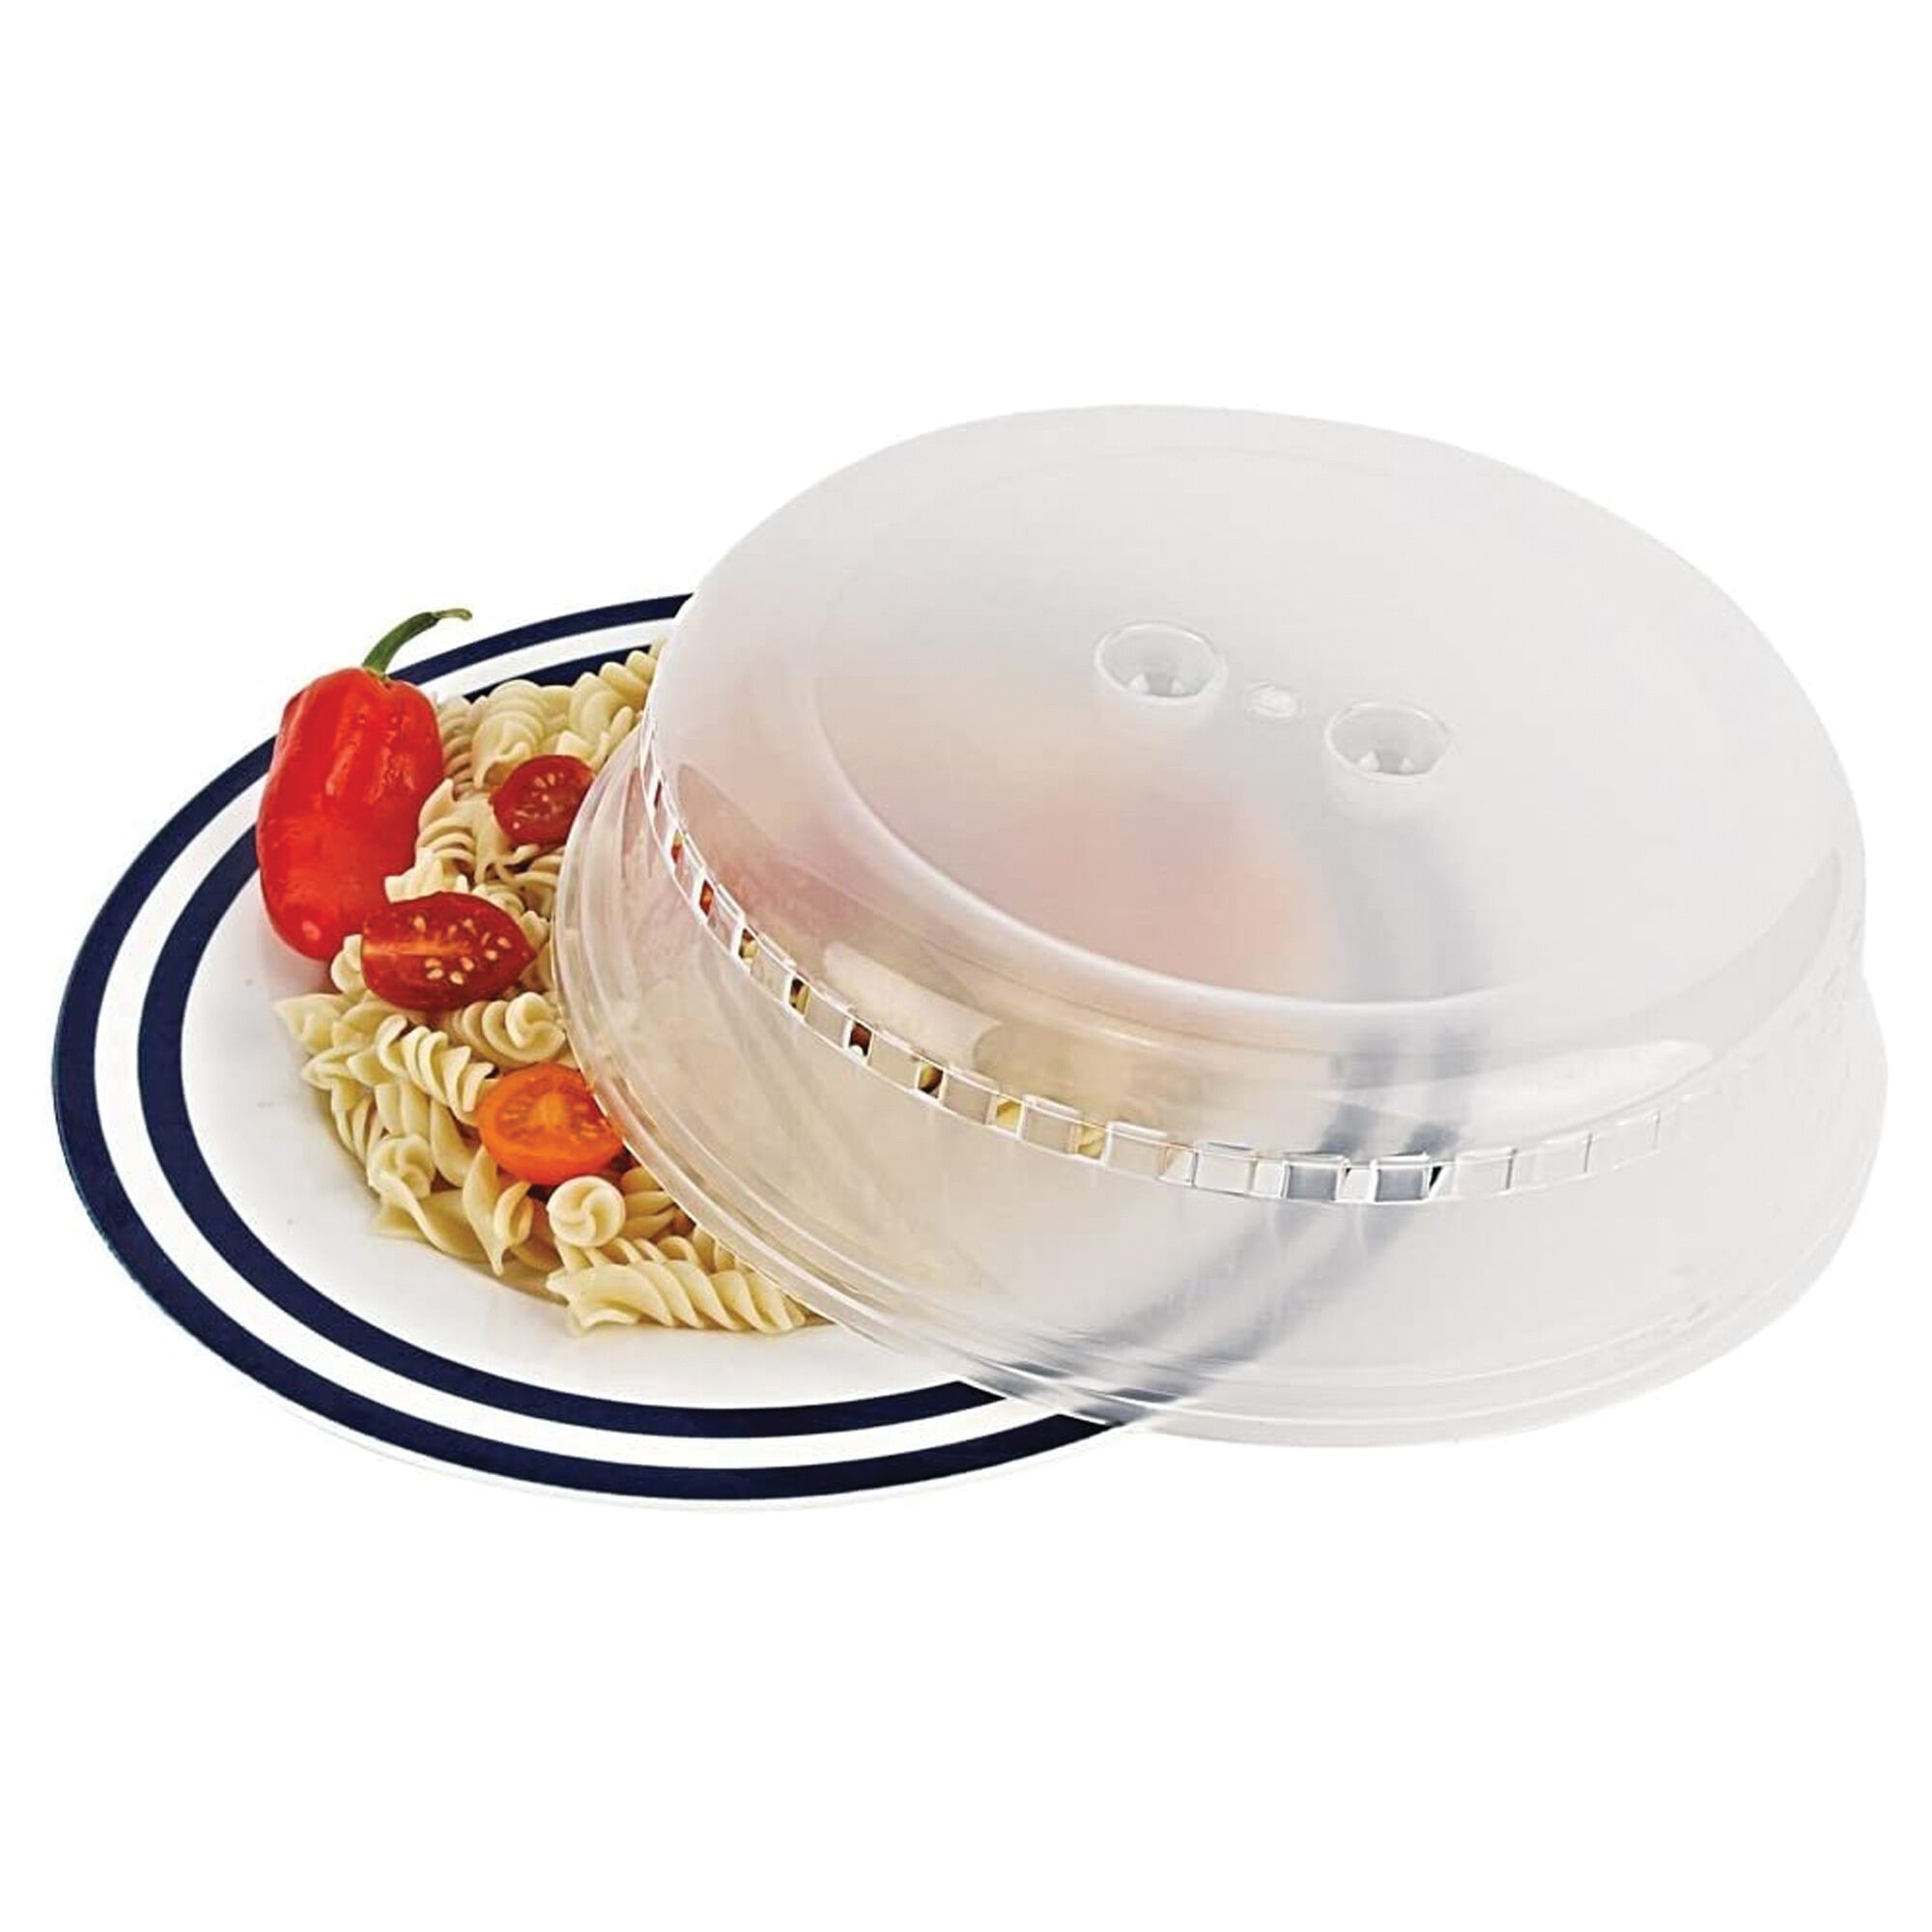 Tovolo Microwave Collapsible Food Cover 3-Pack Multisize Plastic